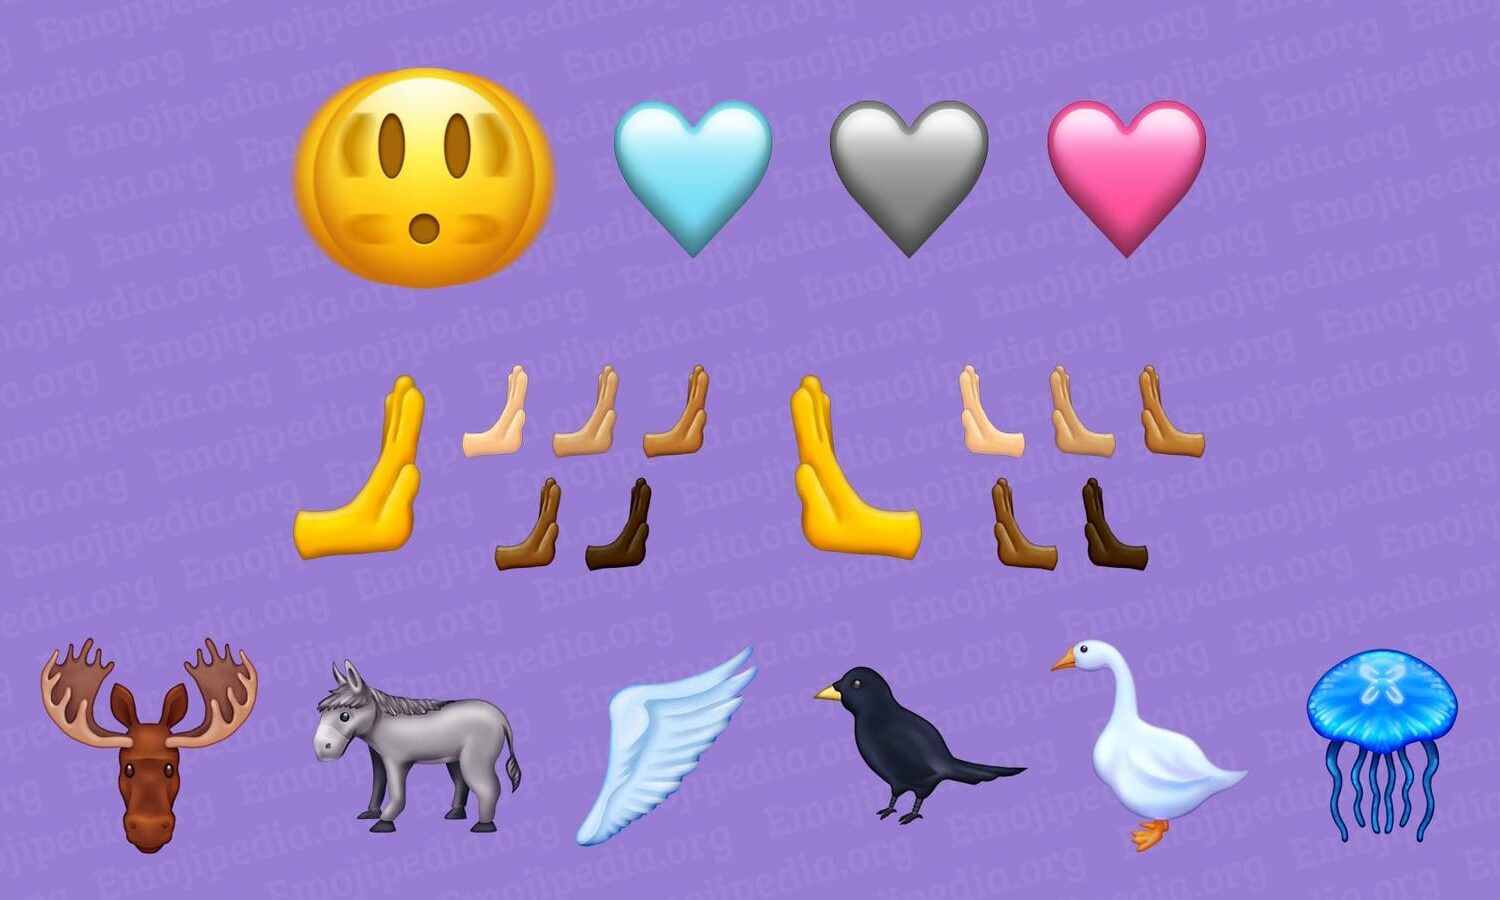 Images of several new emoticons being consider for Emoji 15, including a shaking face, pushing hands, a pink heart, a light-blue heart, a grey heart, a donkey, a moose, a black bird and jellyfish